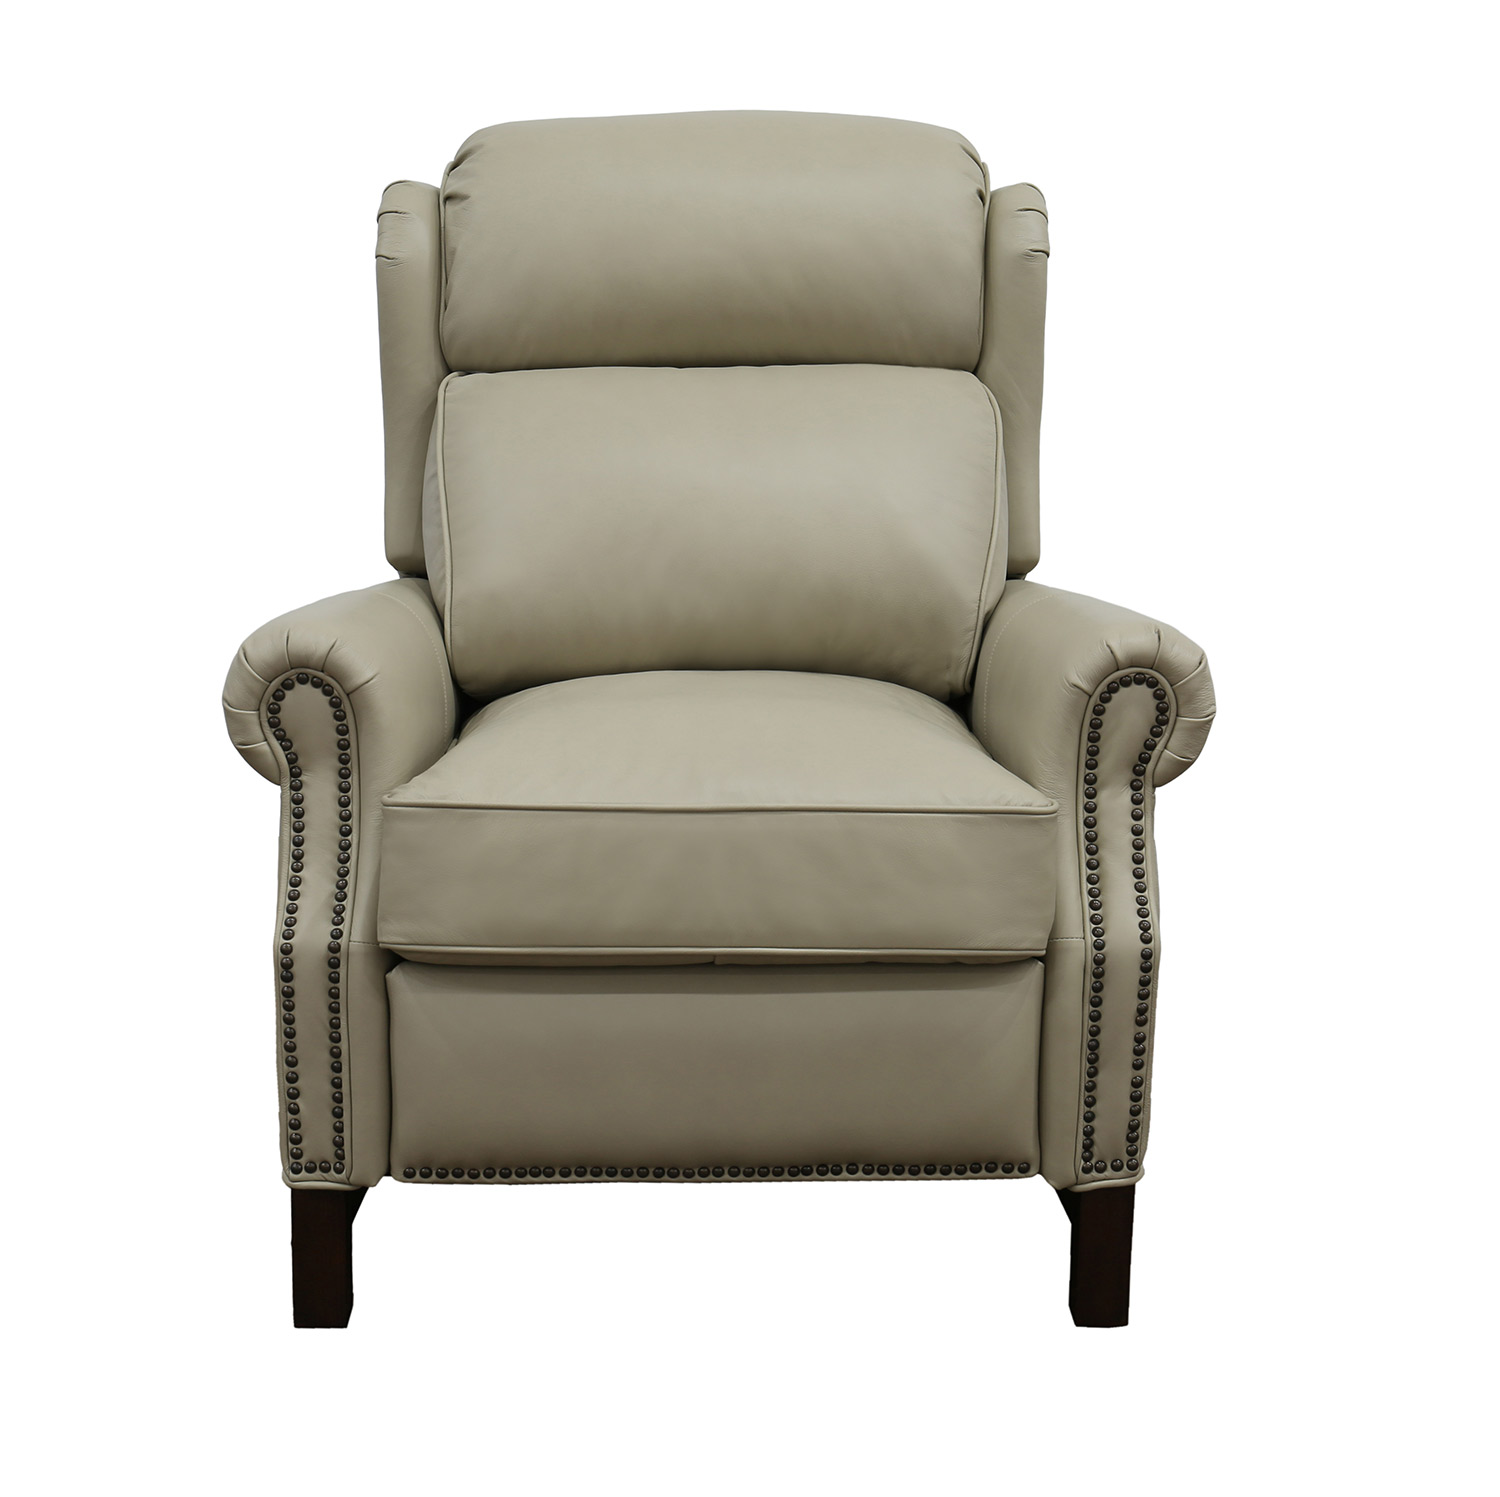 Barcalounger Thornfield Power Recliner Chair with Power Head Rest - Shoreham Cream/All Leather